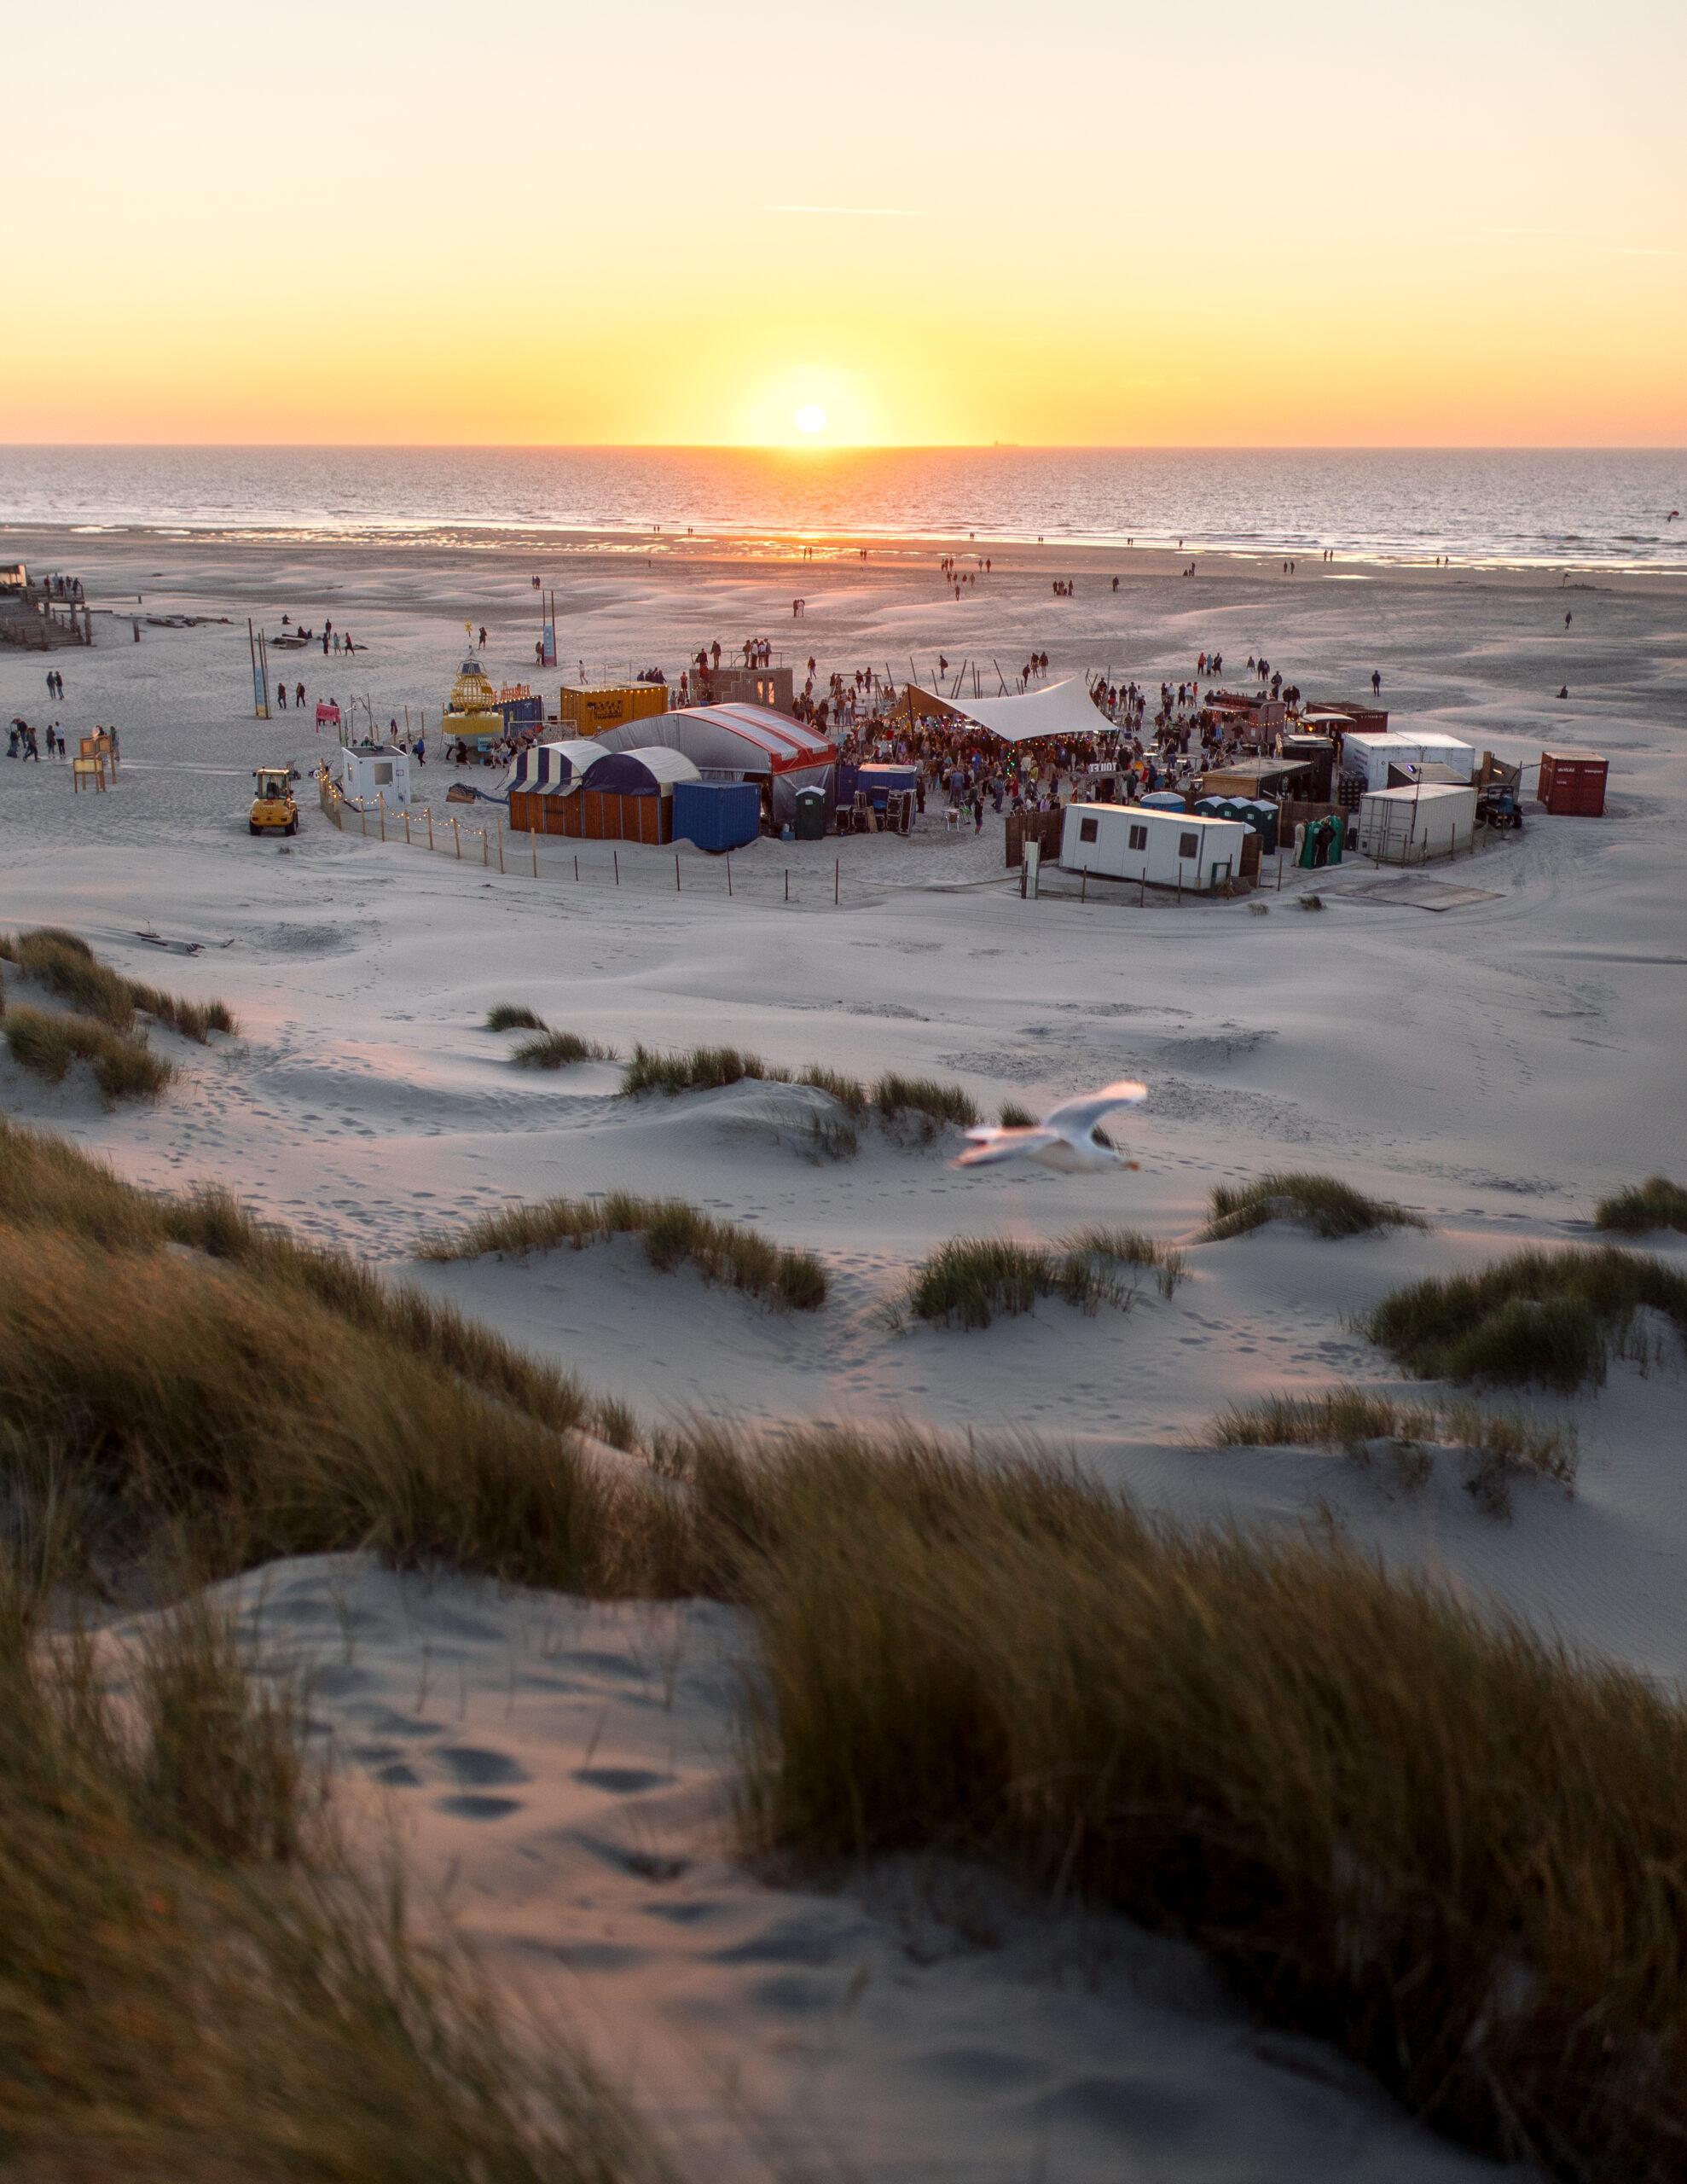 Oerol Festival on Terschelling reflects with contentment on the 42nd edition